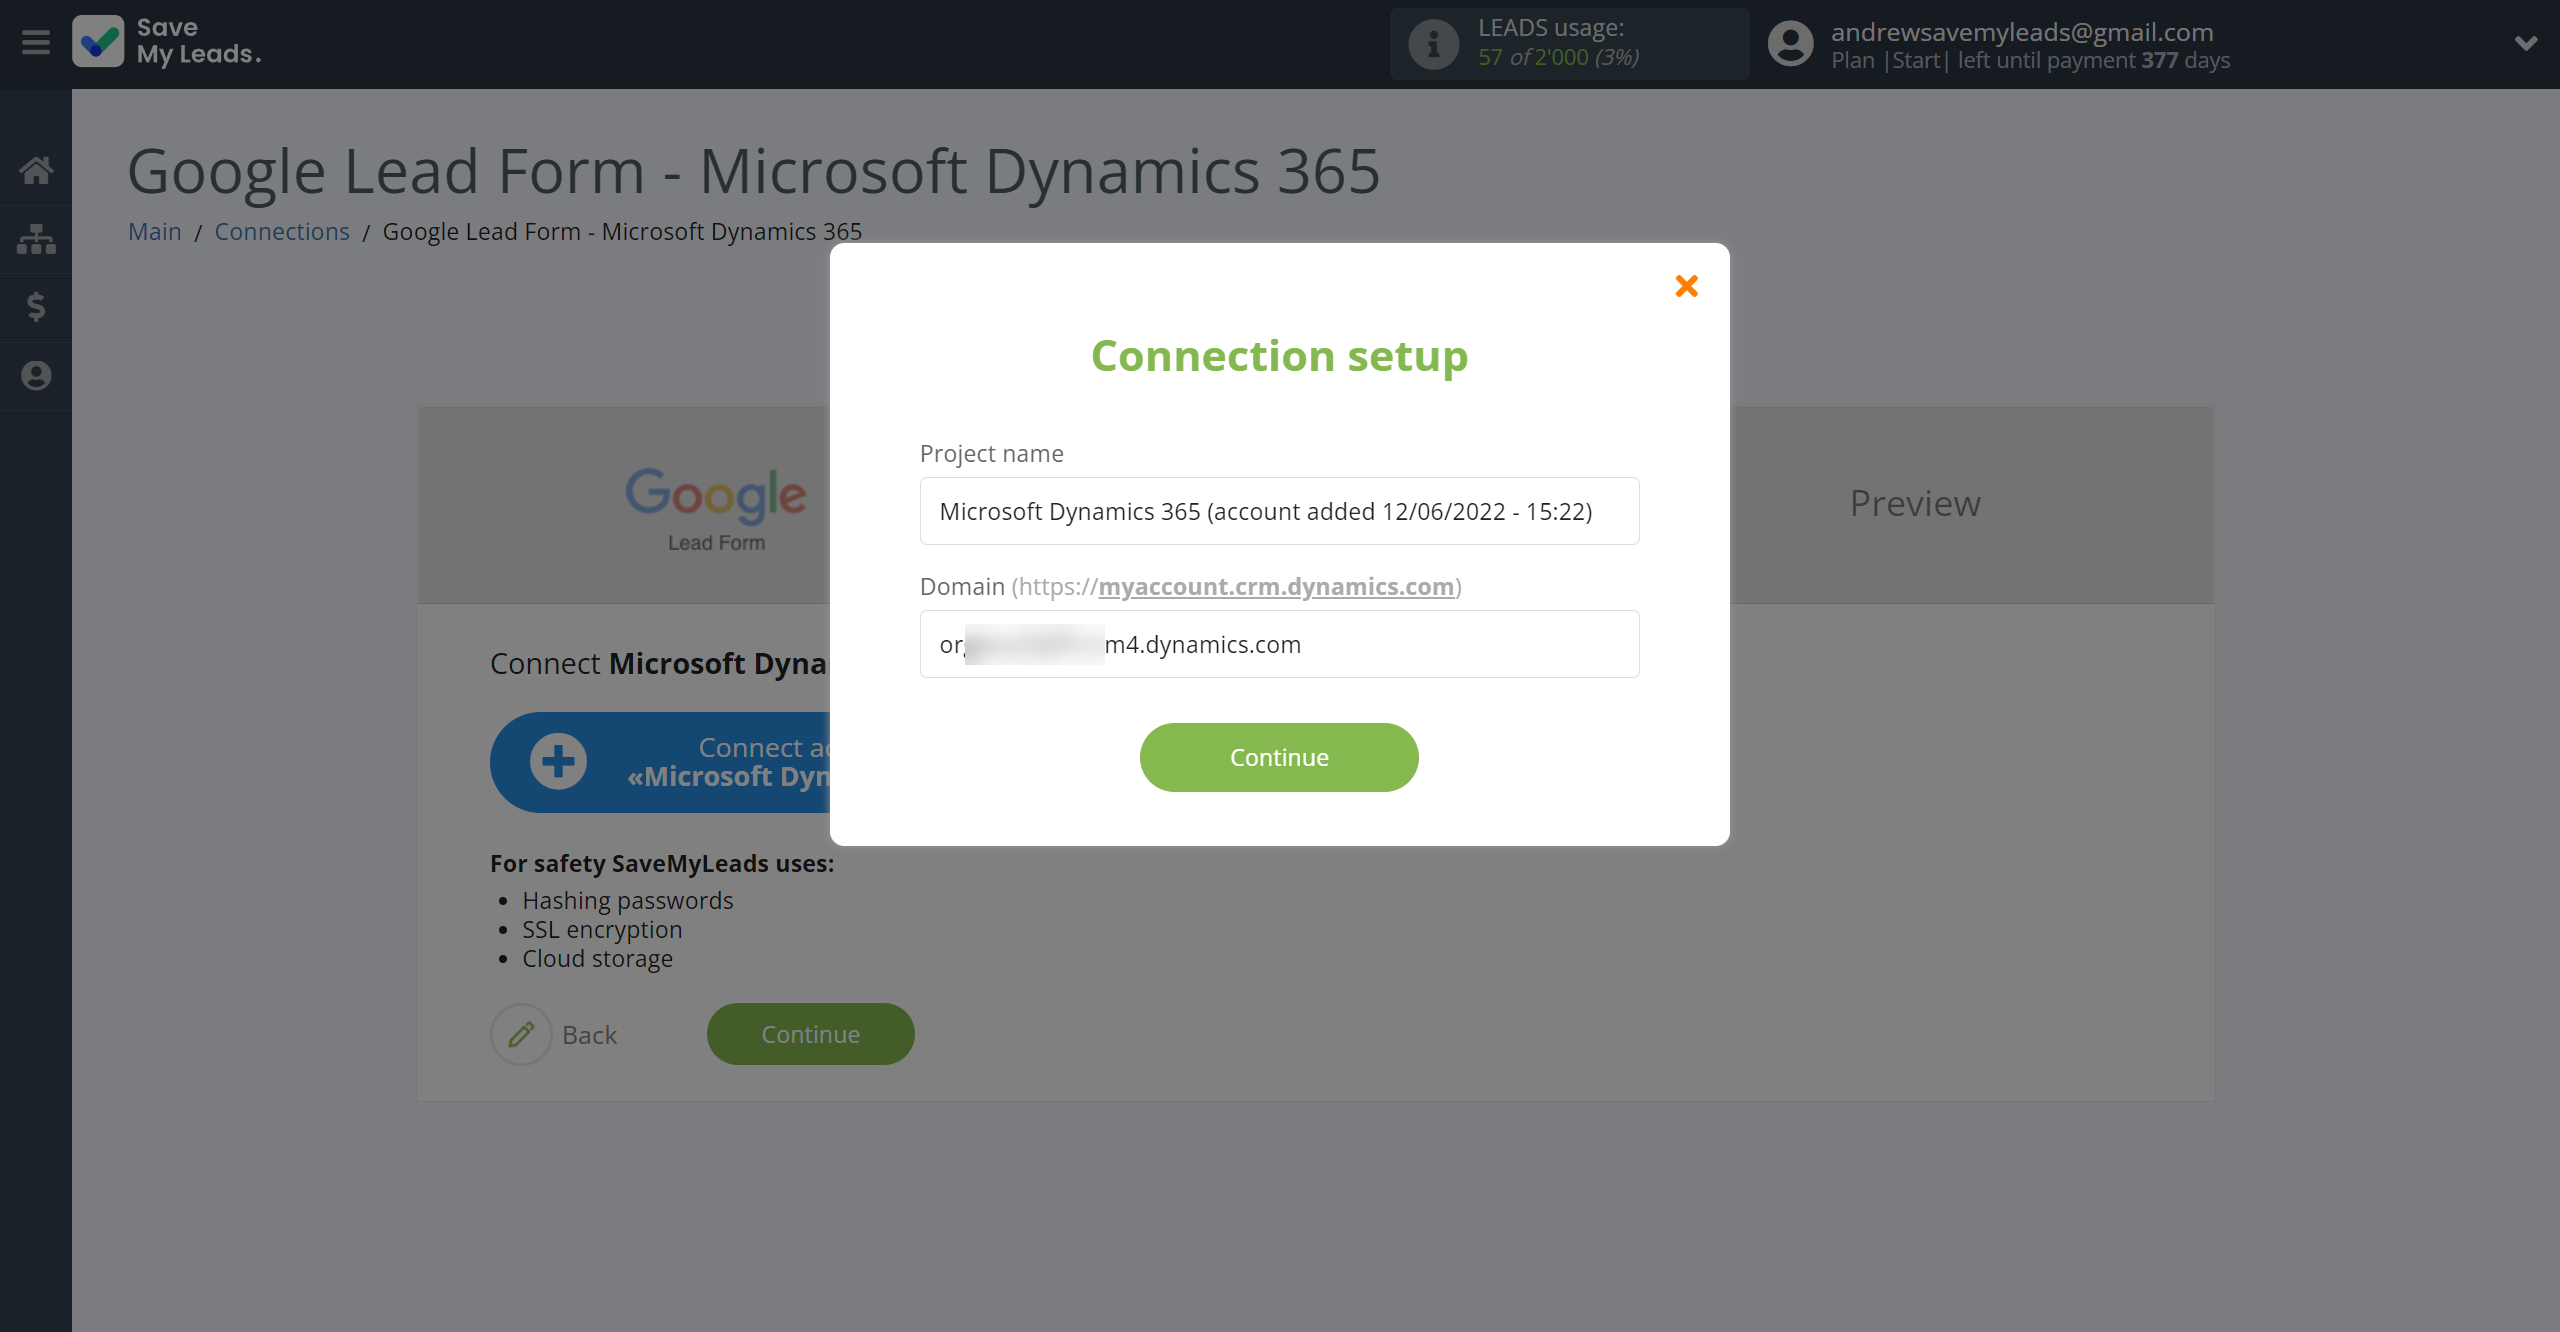 How to Connect Google Lead Form with Microsoft Dynamics 365 Create Opportunity | Data Destination account connection